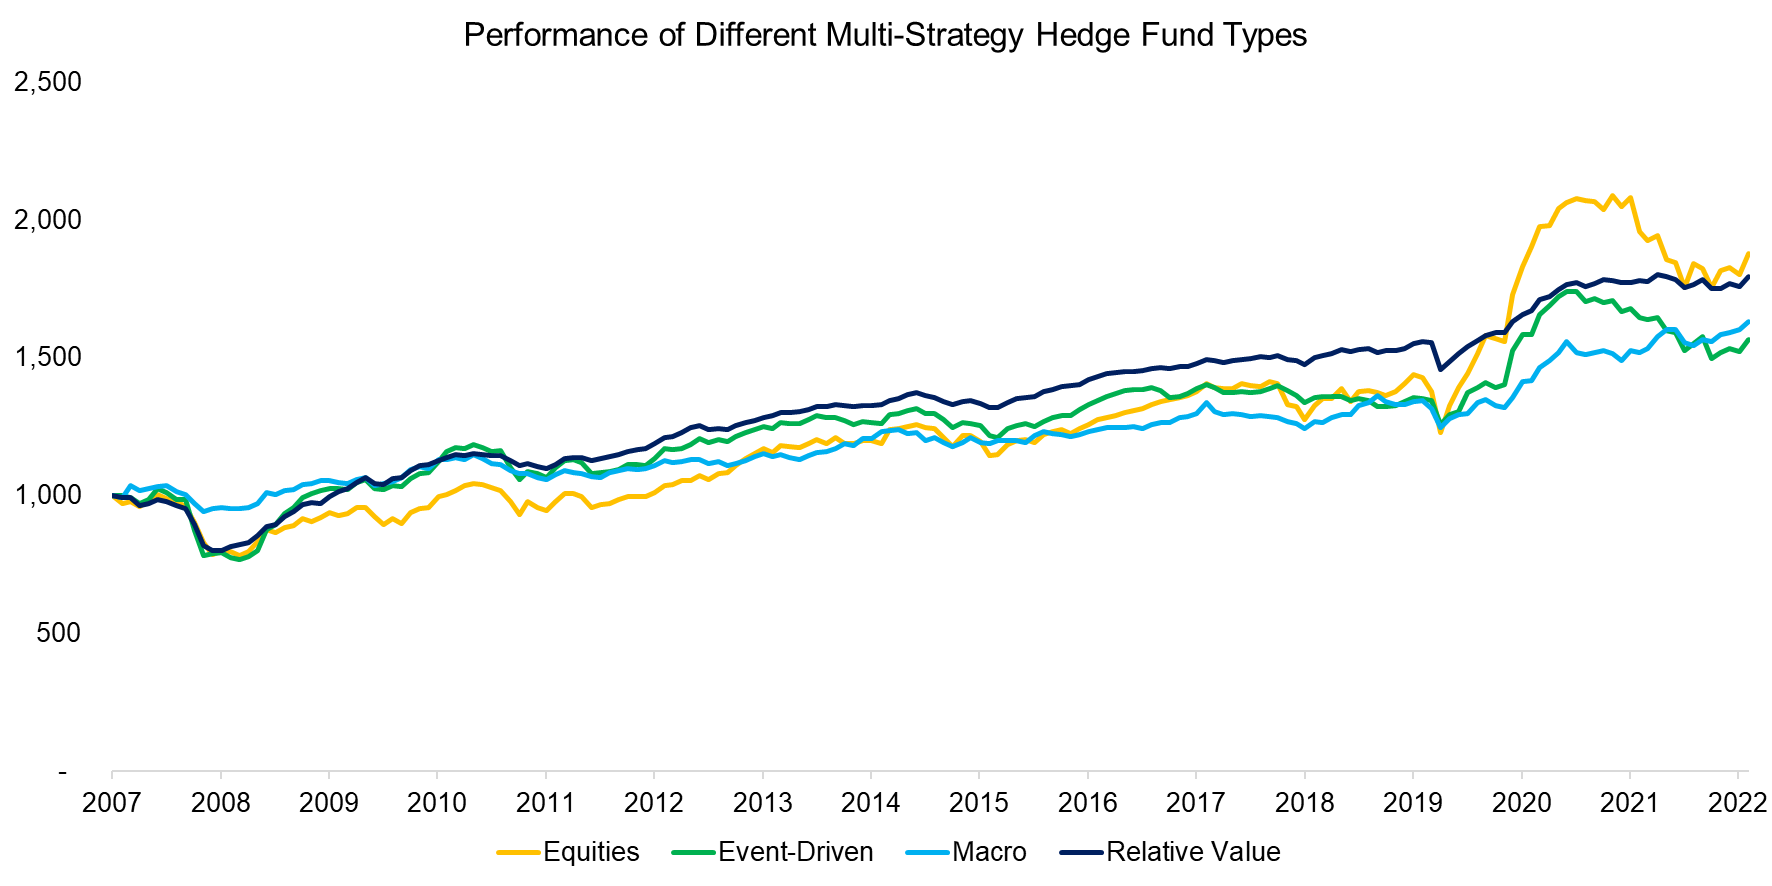 Performance of Different Multi-Strategy Hedge Fund Types